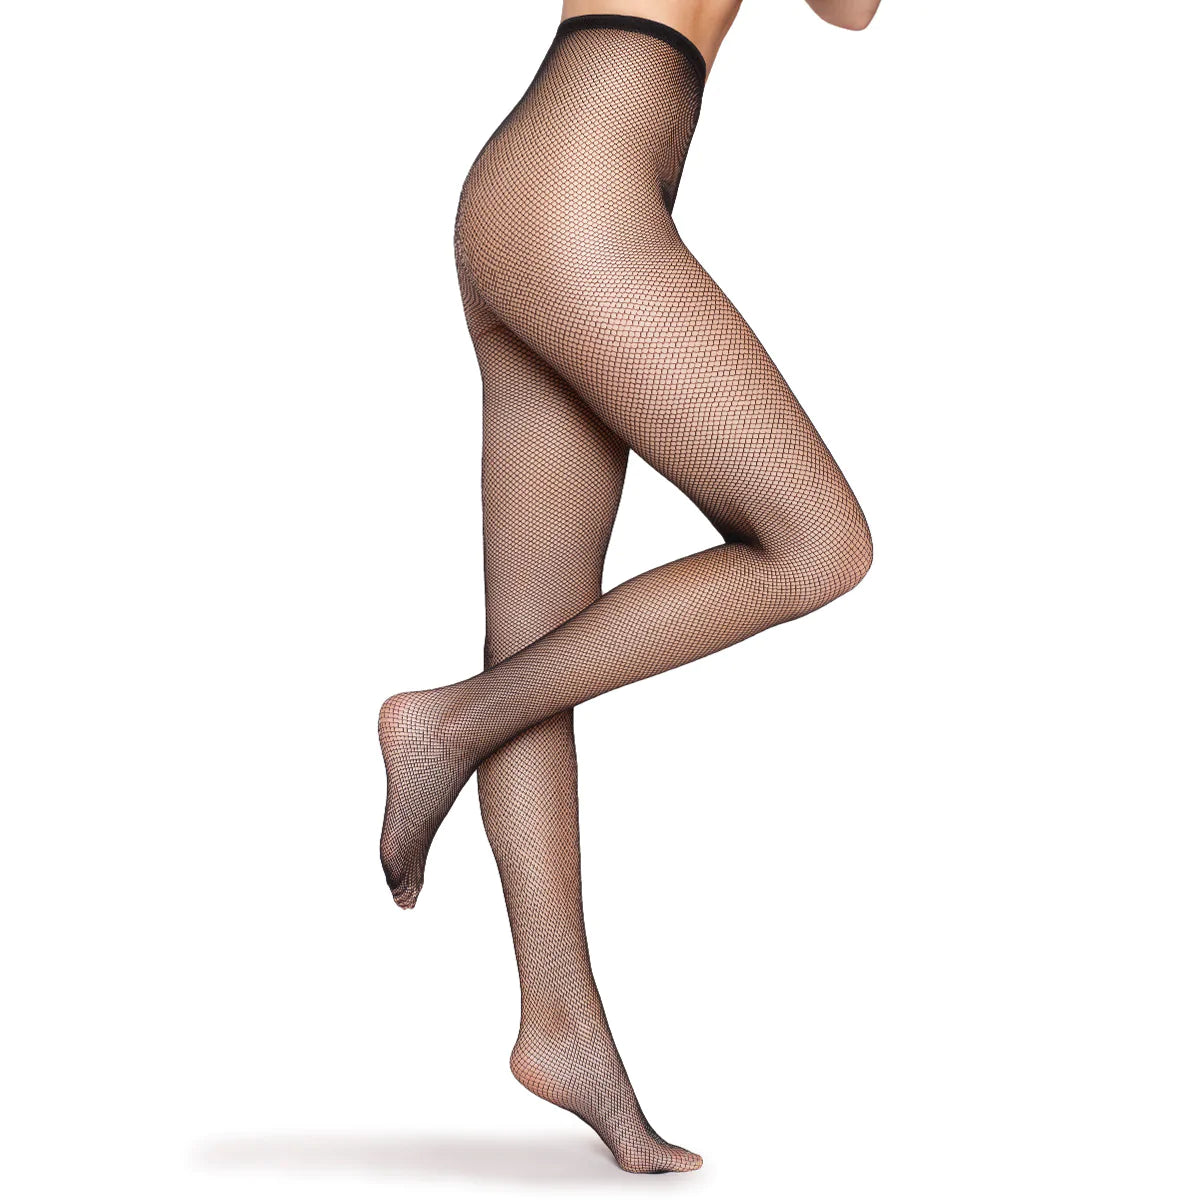 Classic Net Pantyhose - Fully Transparent